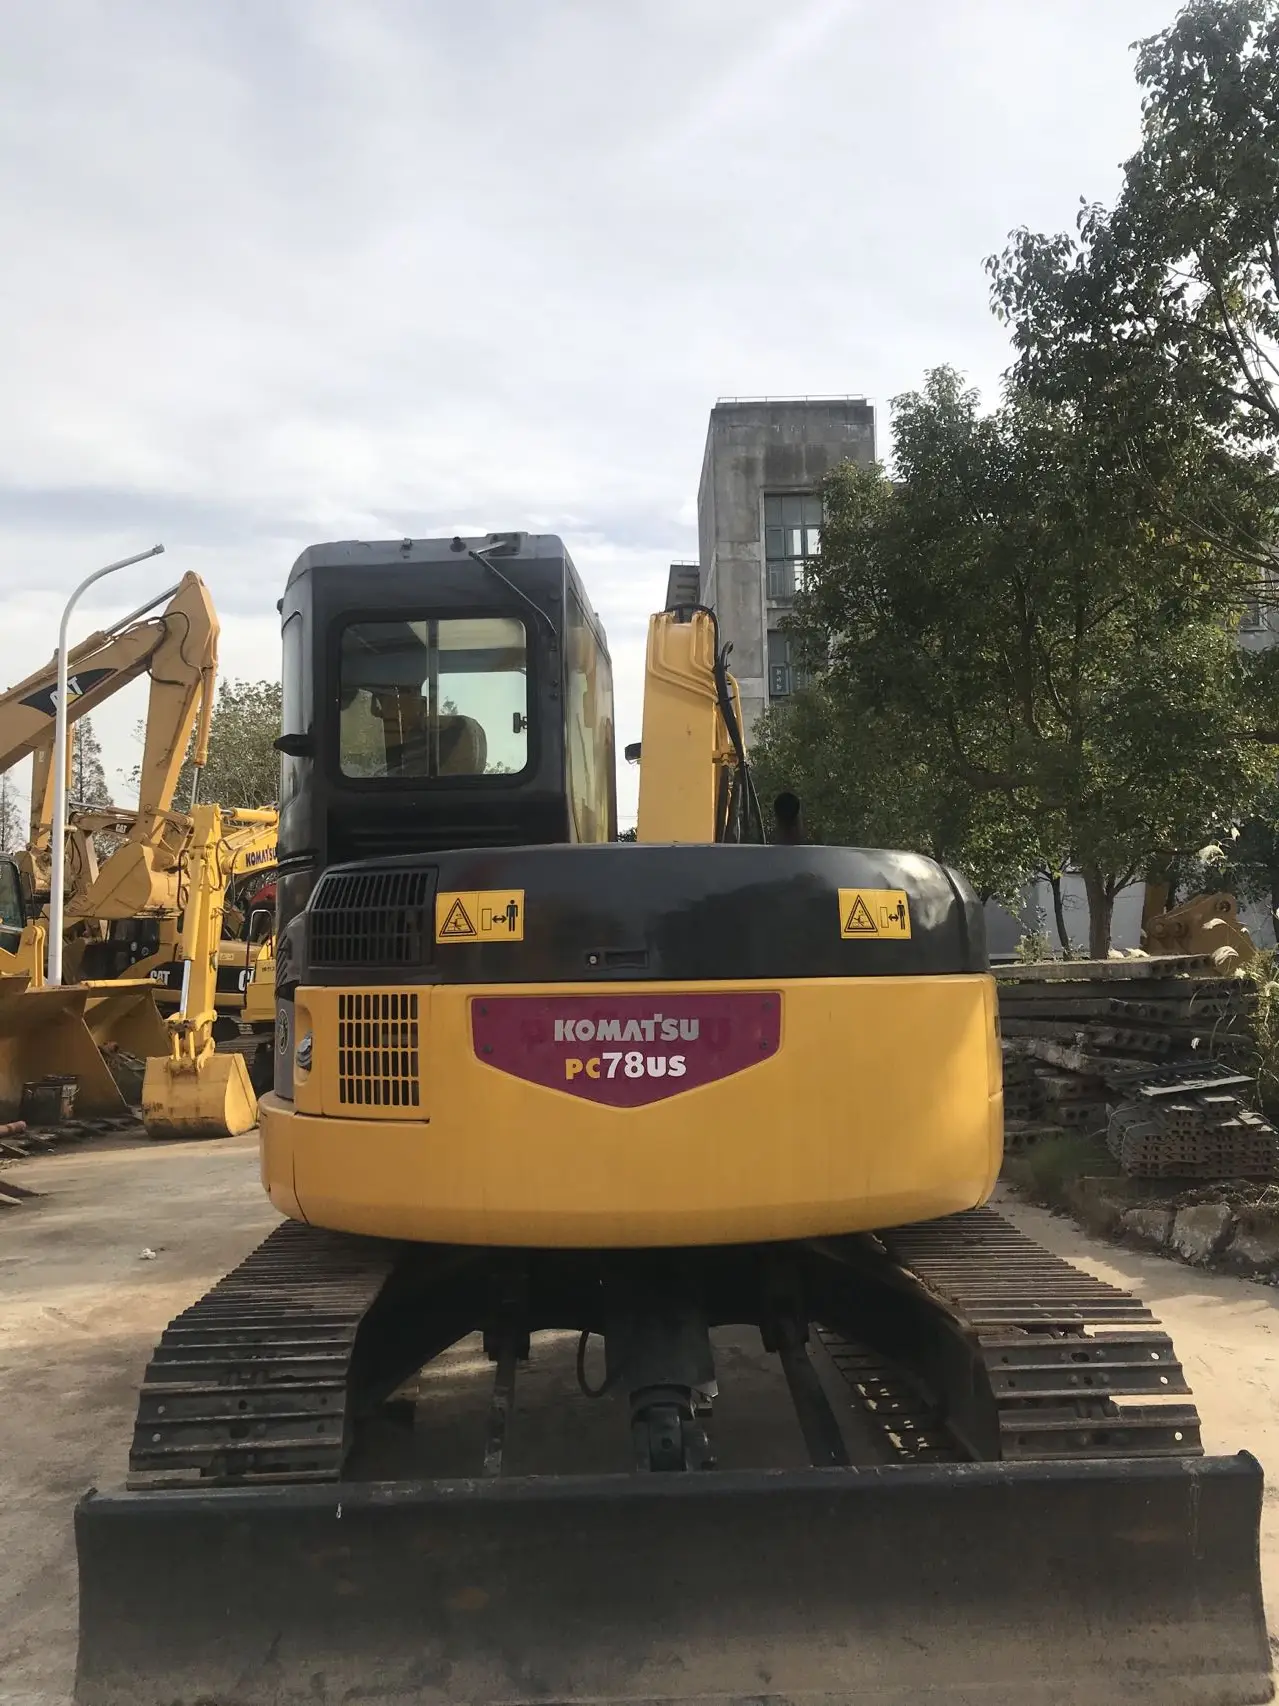 product second hand japanese excavator Komatsuu-78 with high operating efficiency cheap for sale